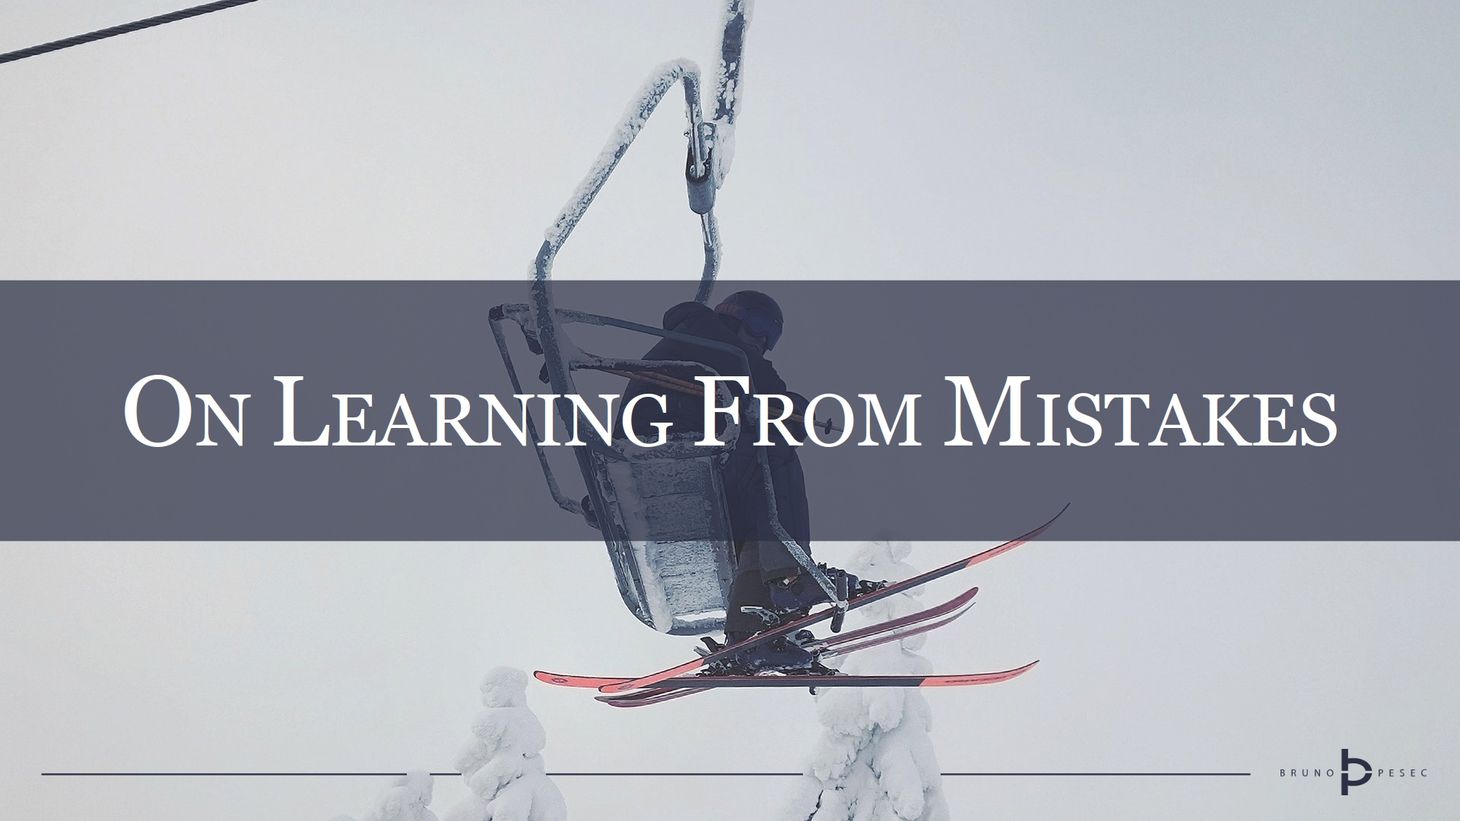 On learning from mistakes